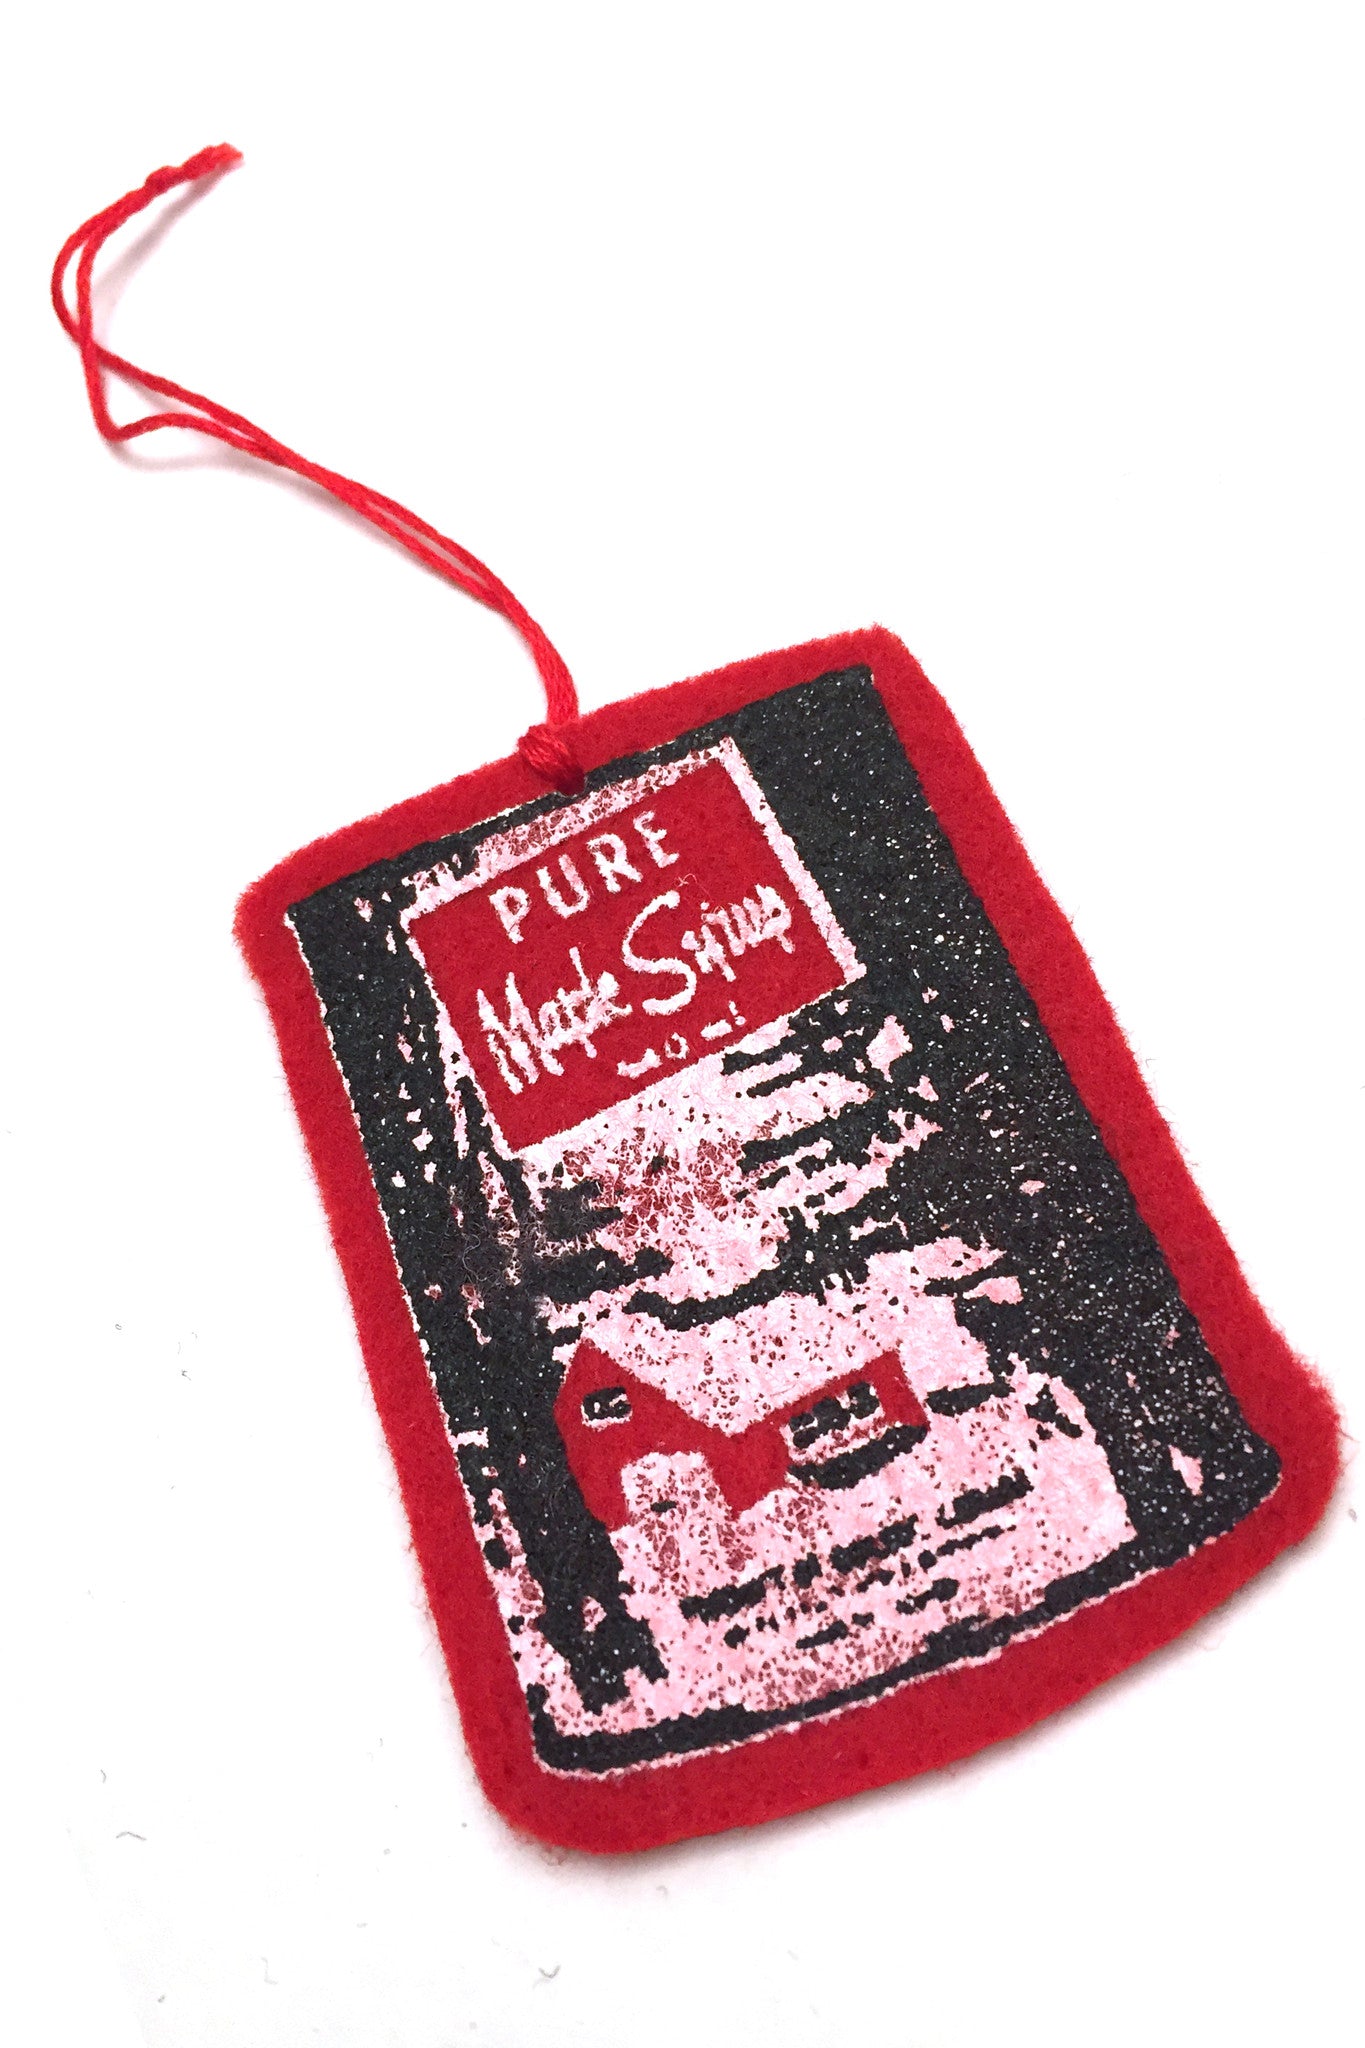 Red Maple Syrup Cans Sirop D'érable handmade felt ornaments. Handmade in our Ottawa studio.